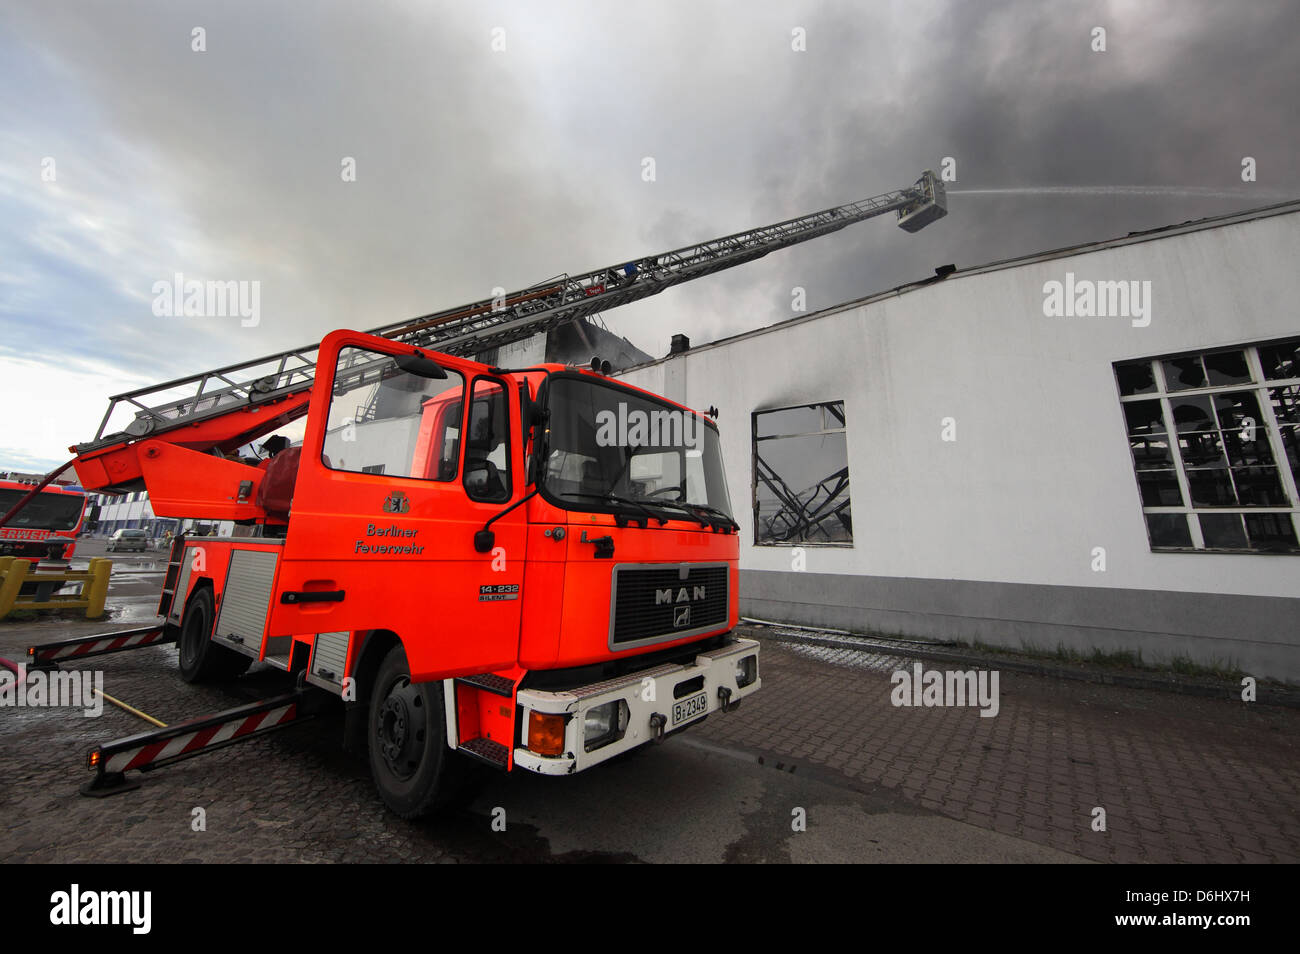 Berlin, Germany, turntable ladder for use in extinguishing Berlin Siemens City Stock Photo